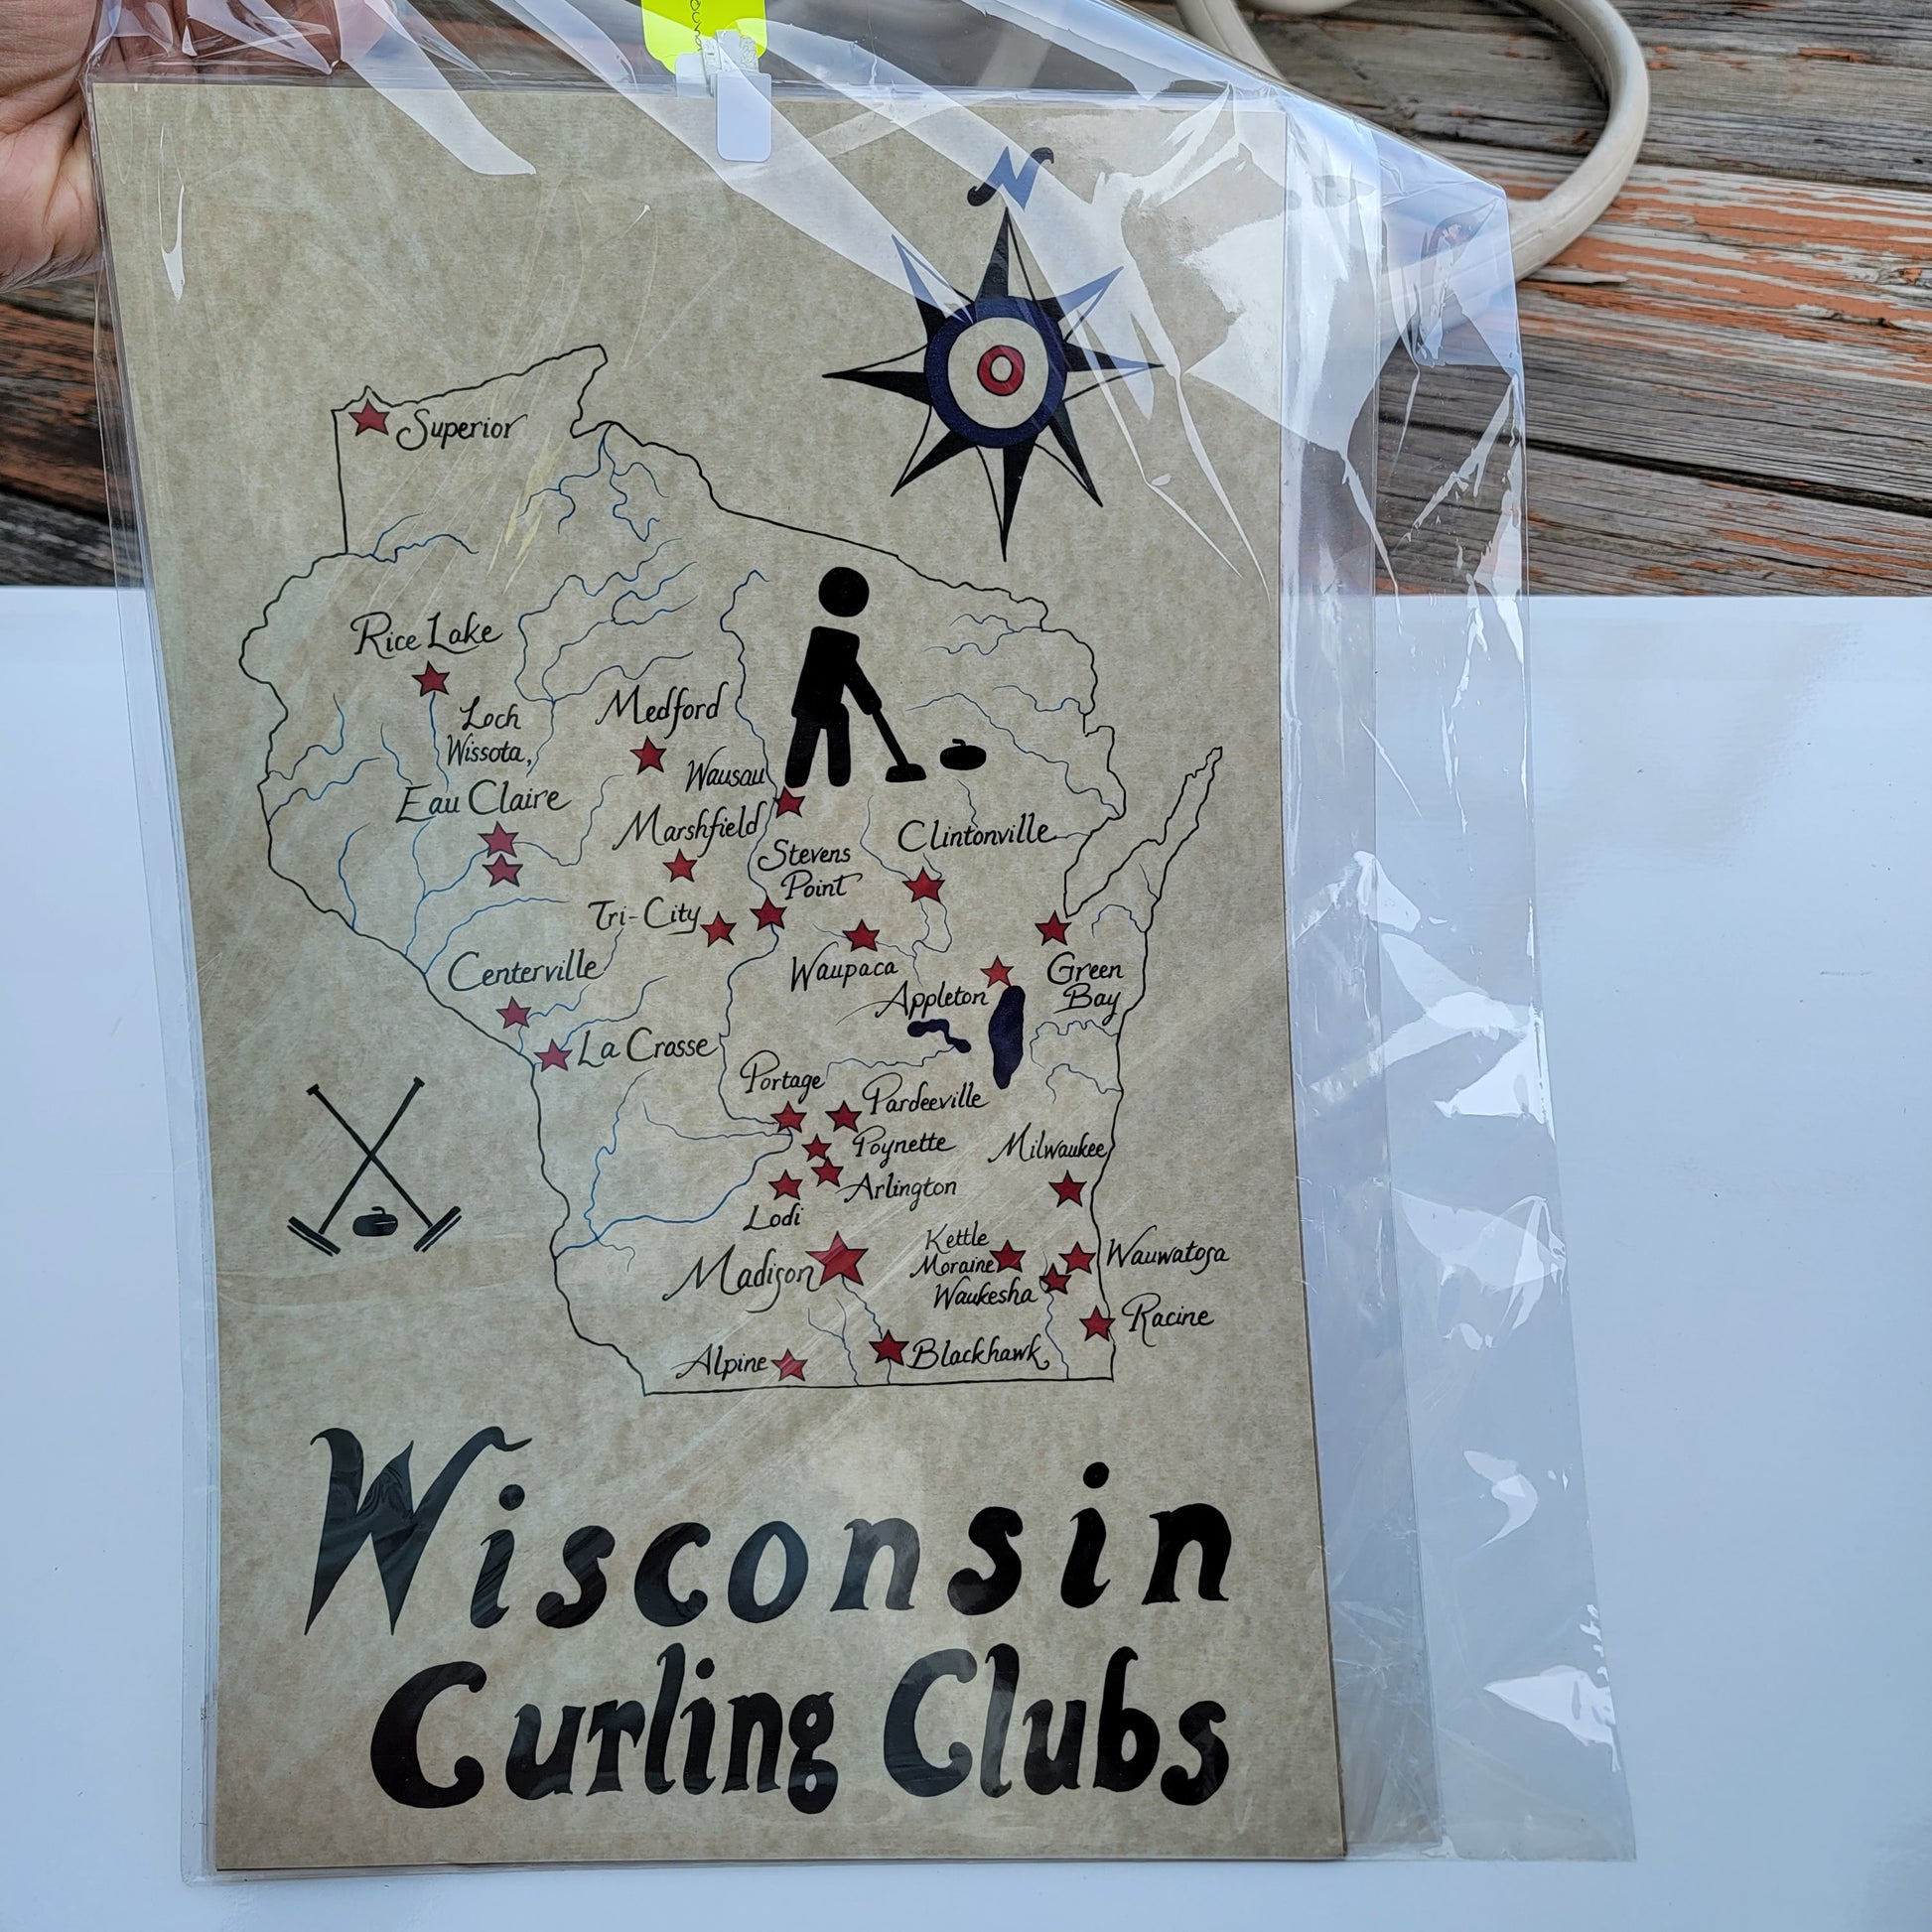 Curling clubs in Wisconsin